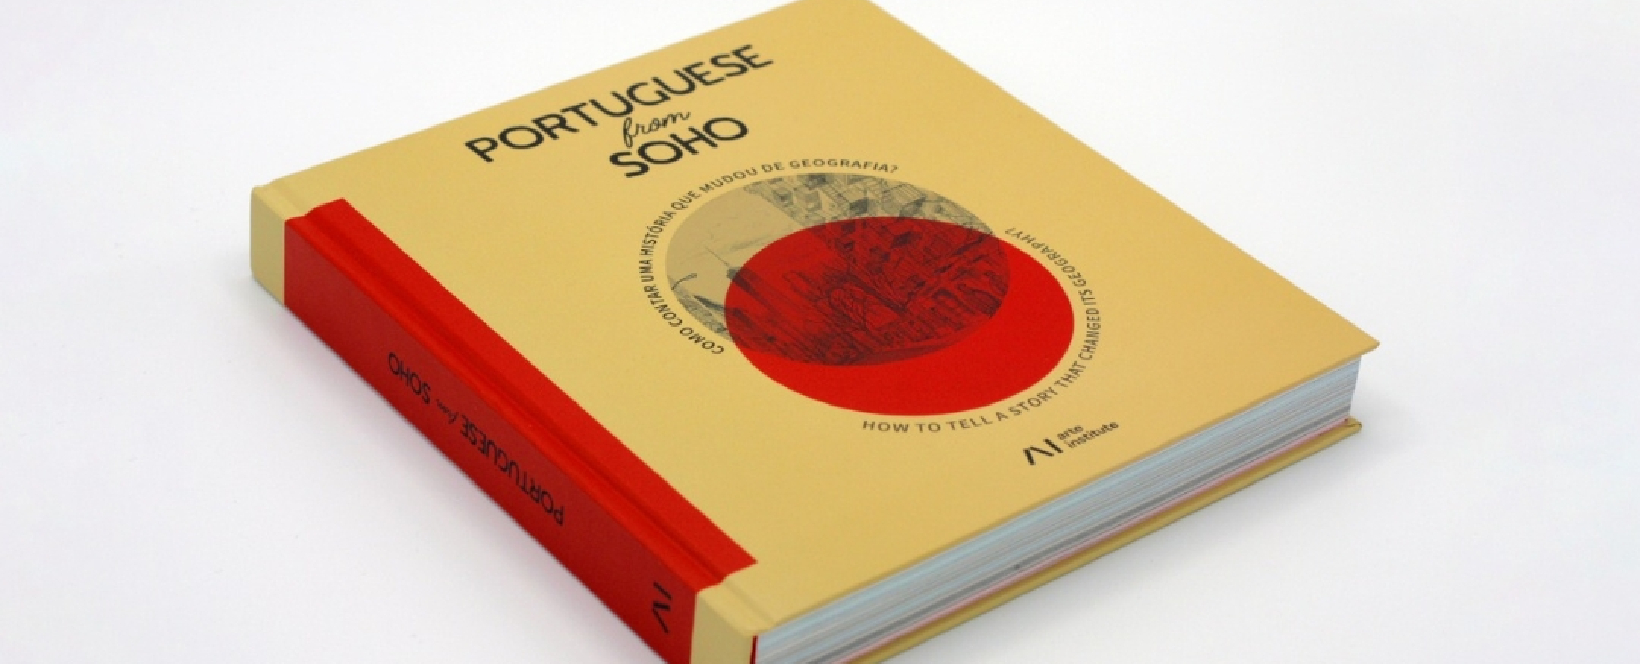 Portuguese from SoHo Book